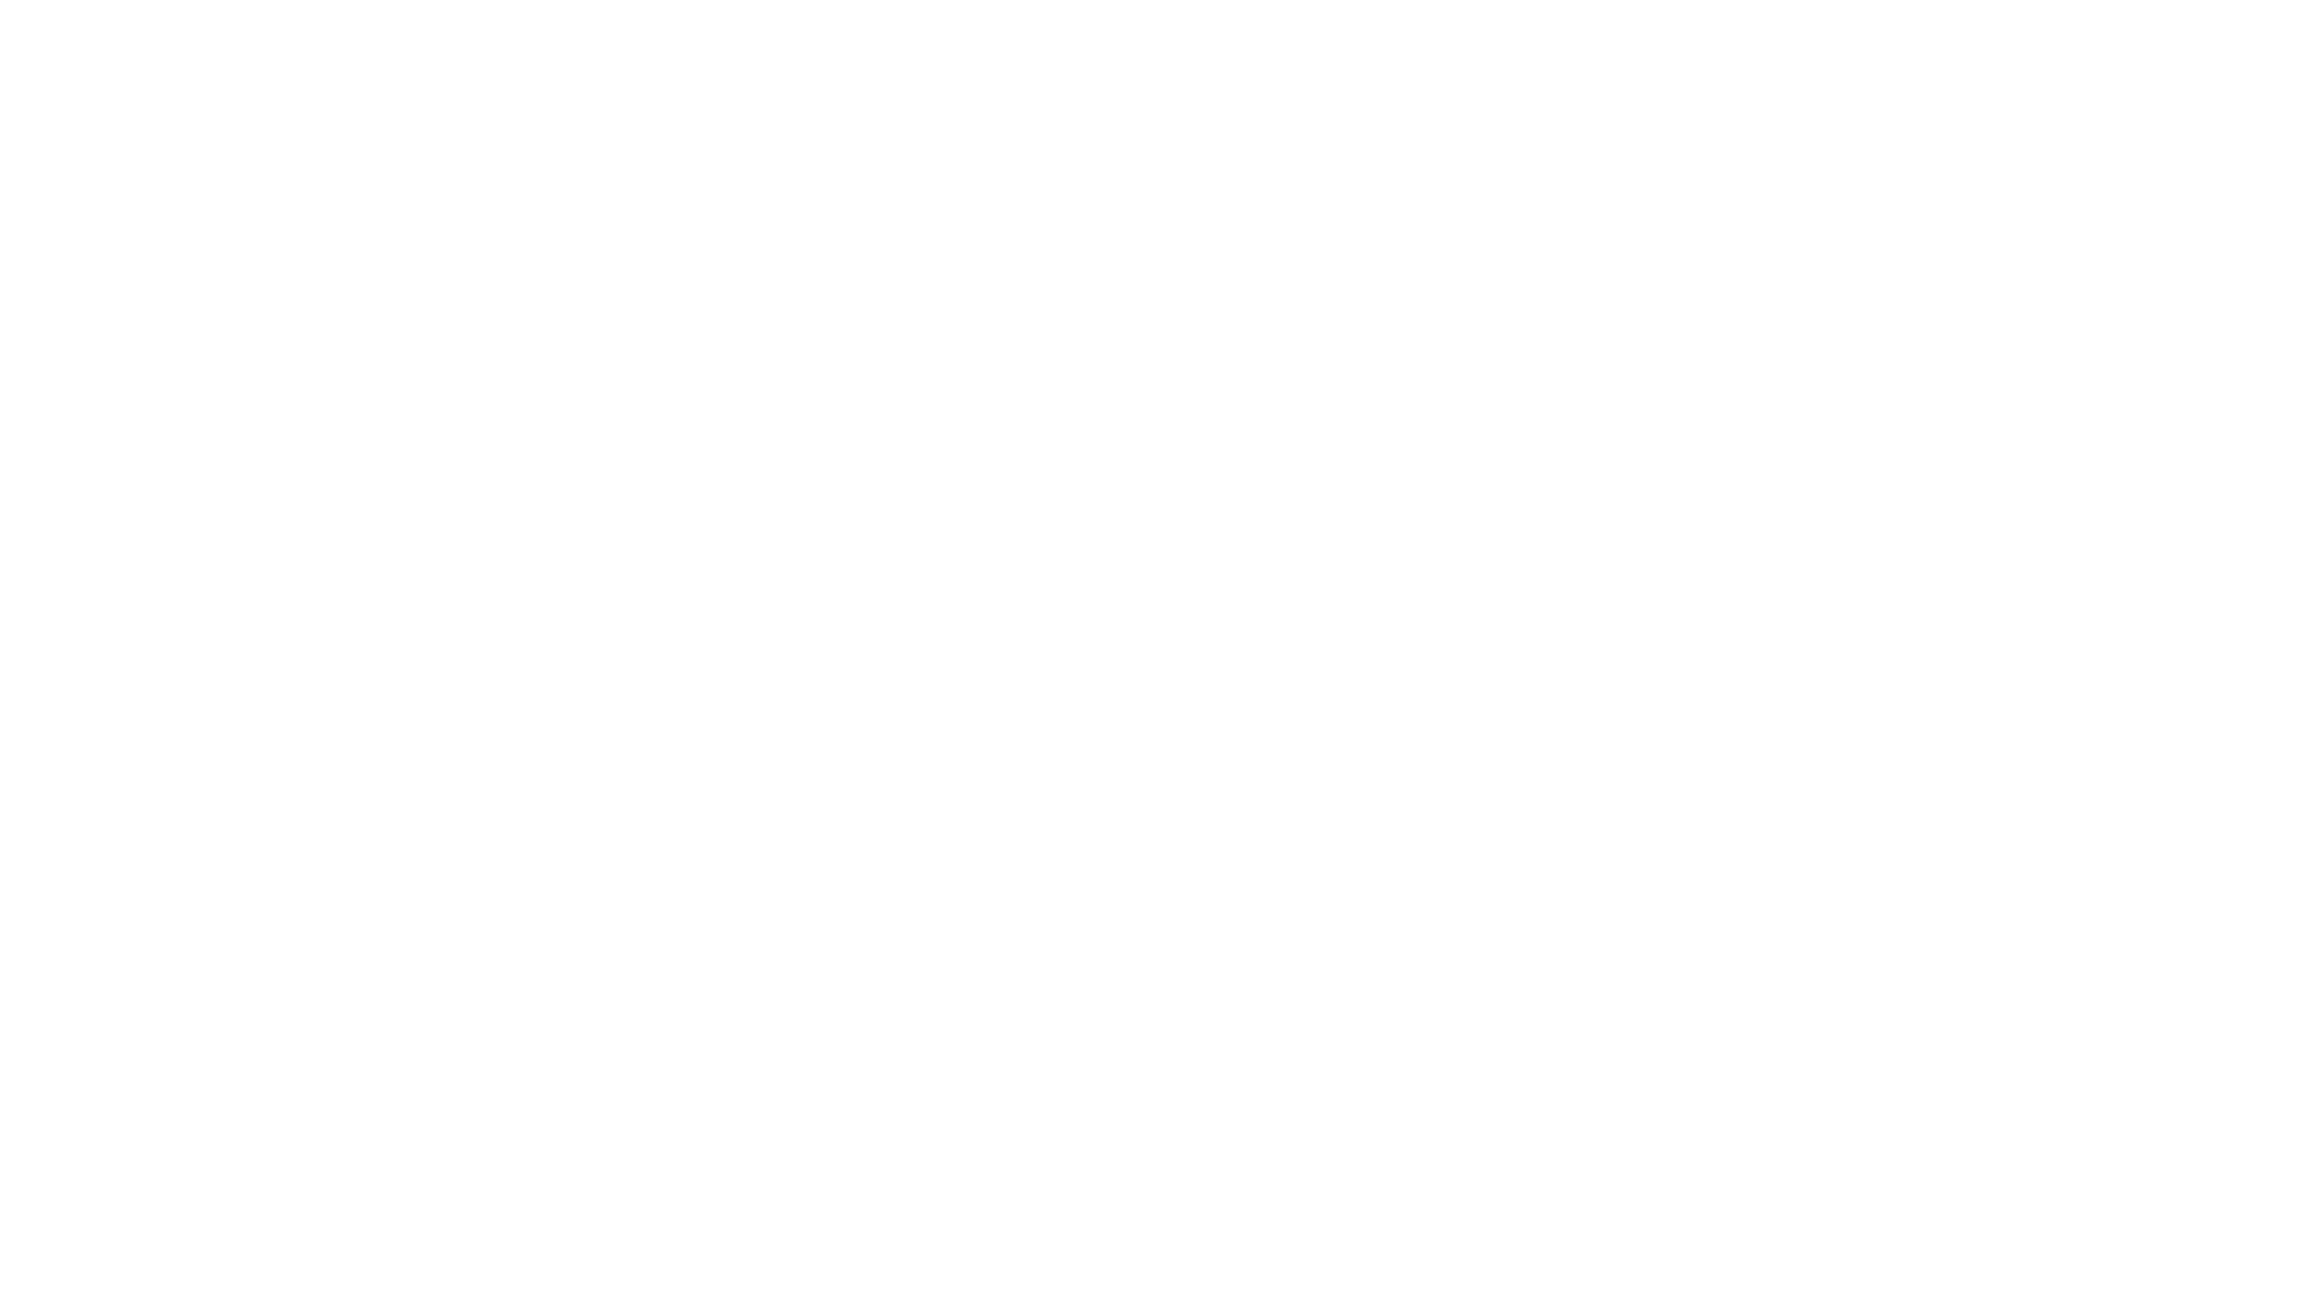 Premier Consulting Services, Inc